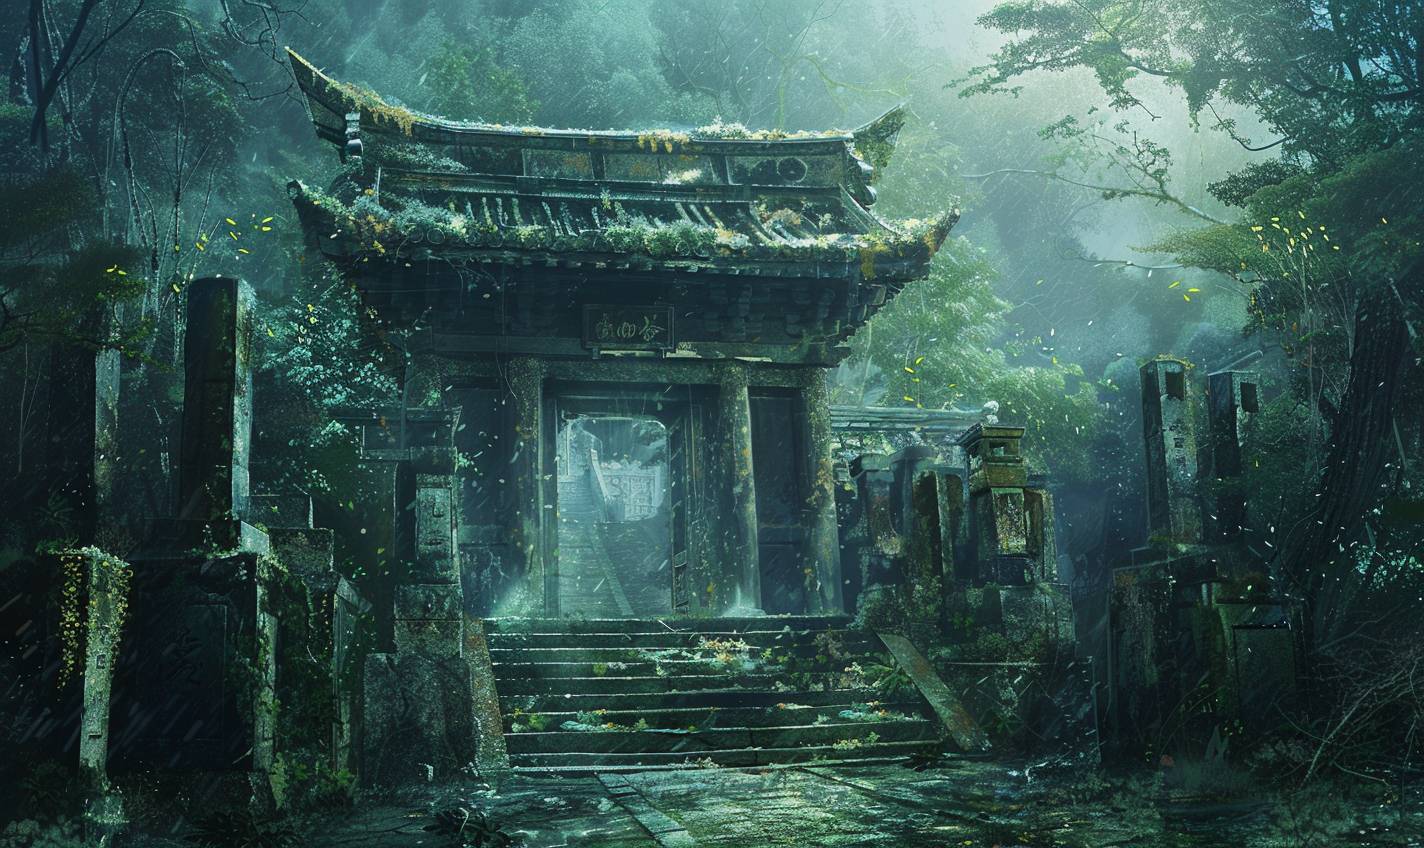 In the style of Kunisada, a forgotten temple hidden in the jungle